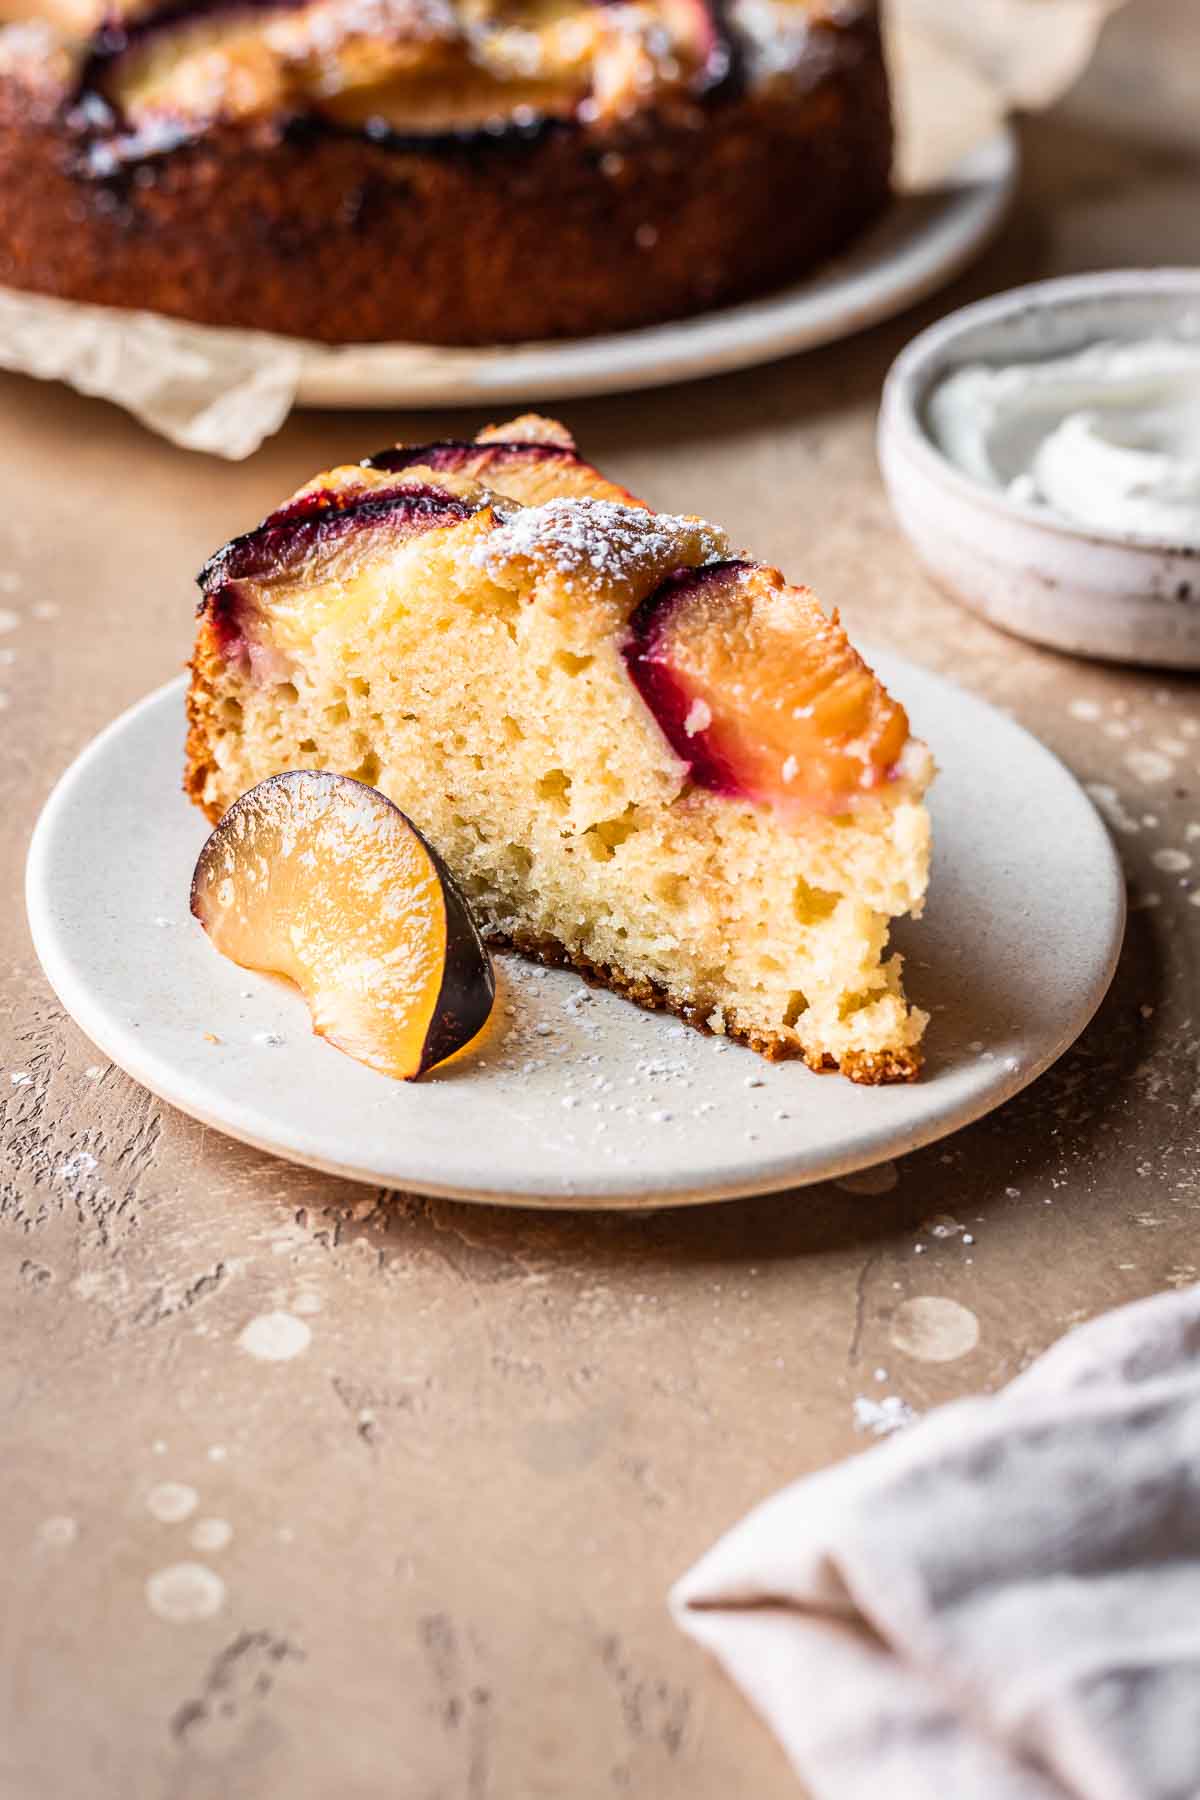 A slice of plum cake on a plate.